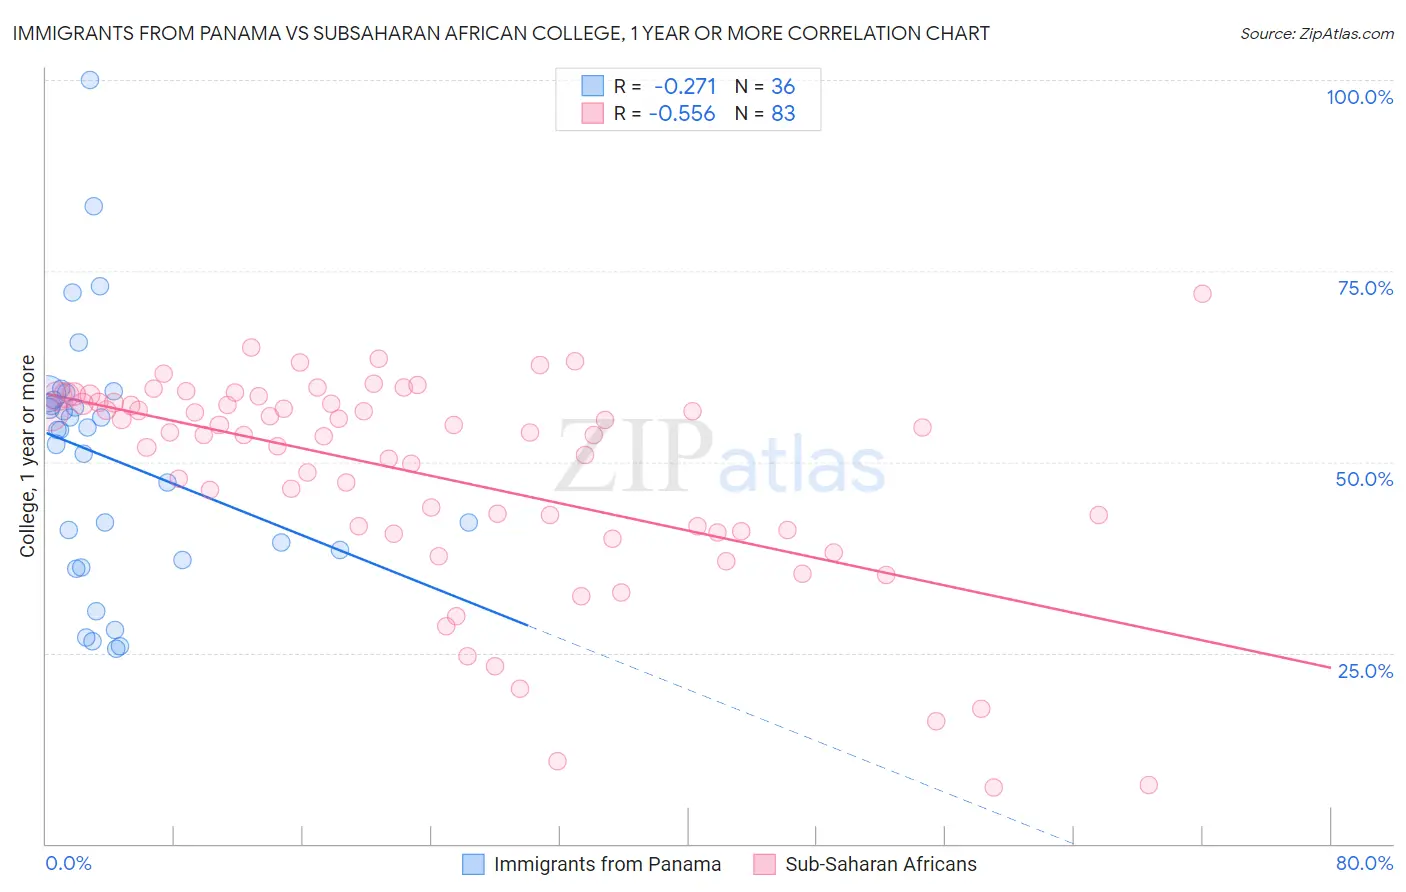 Immigrants from Panama vs Subsaharan African College, 1 year or more